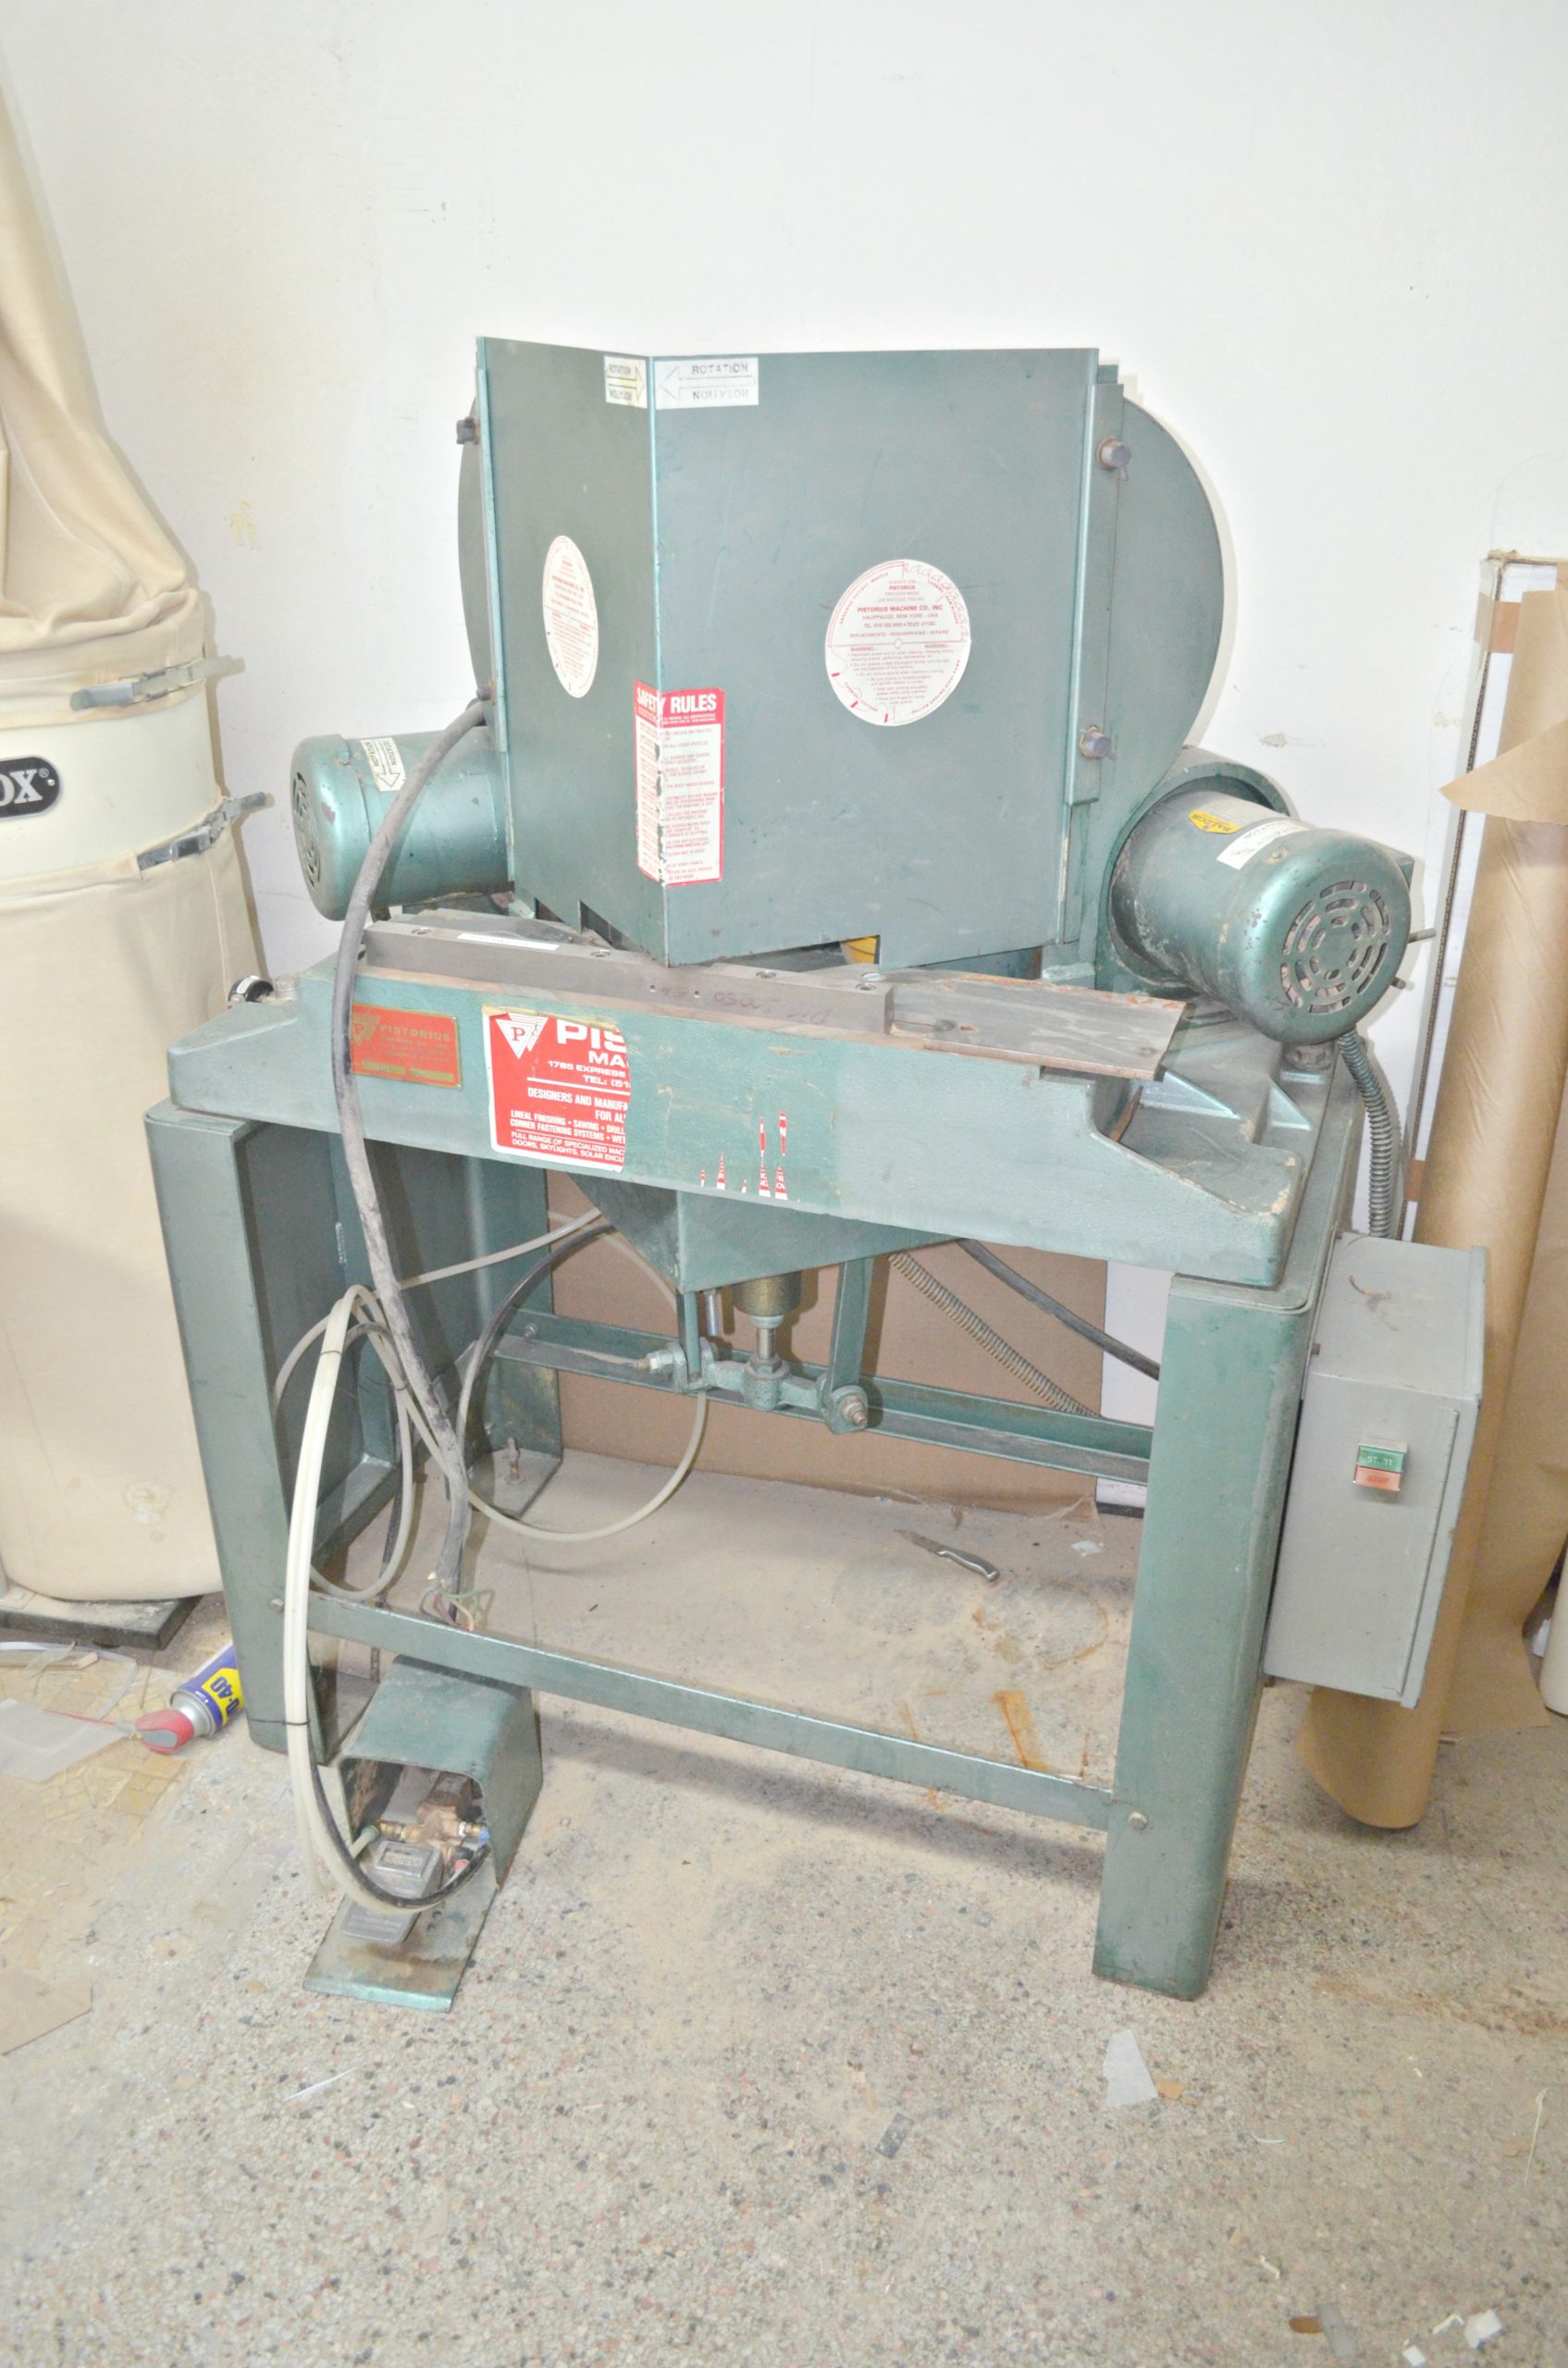 Woodworking / Picture Framing Equipment Lot (used) Item # AGFS-56 (Florida)